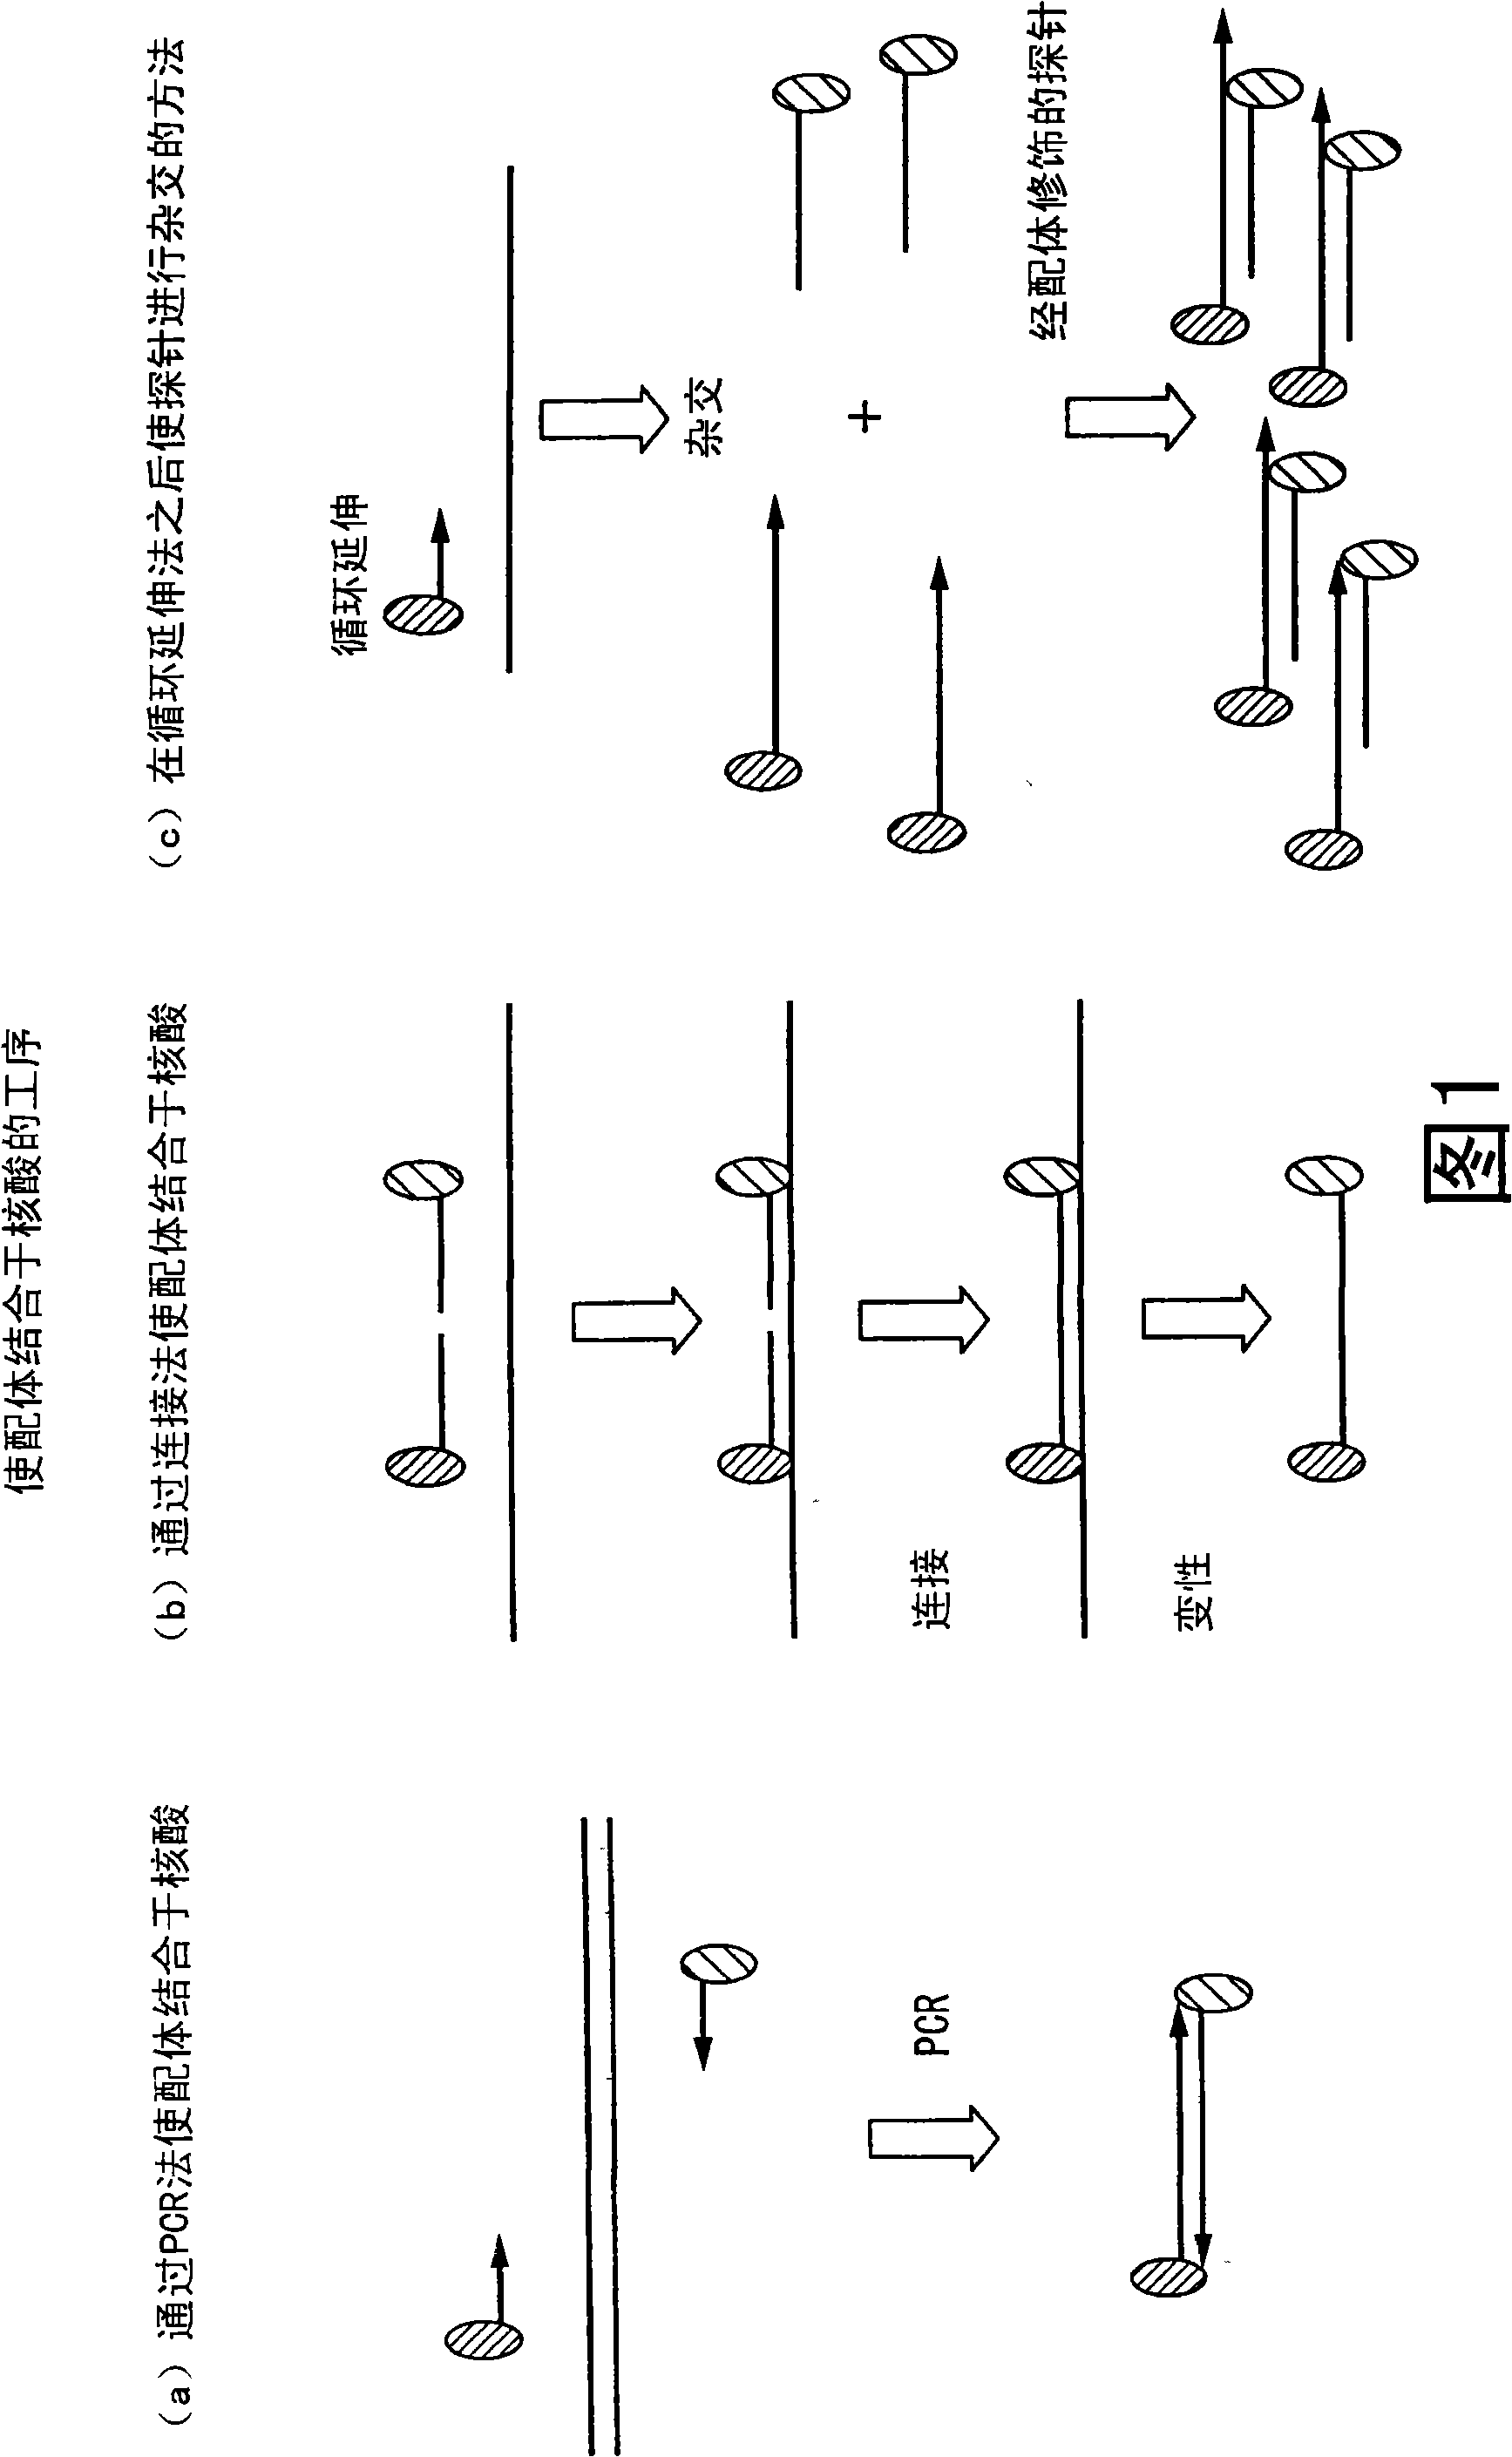 Method of analyzing change in primary structure of nucleic acid